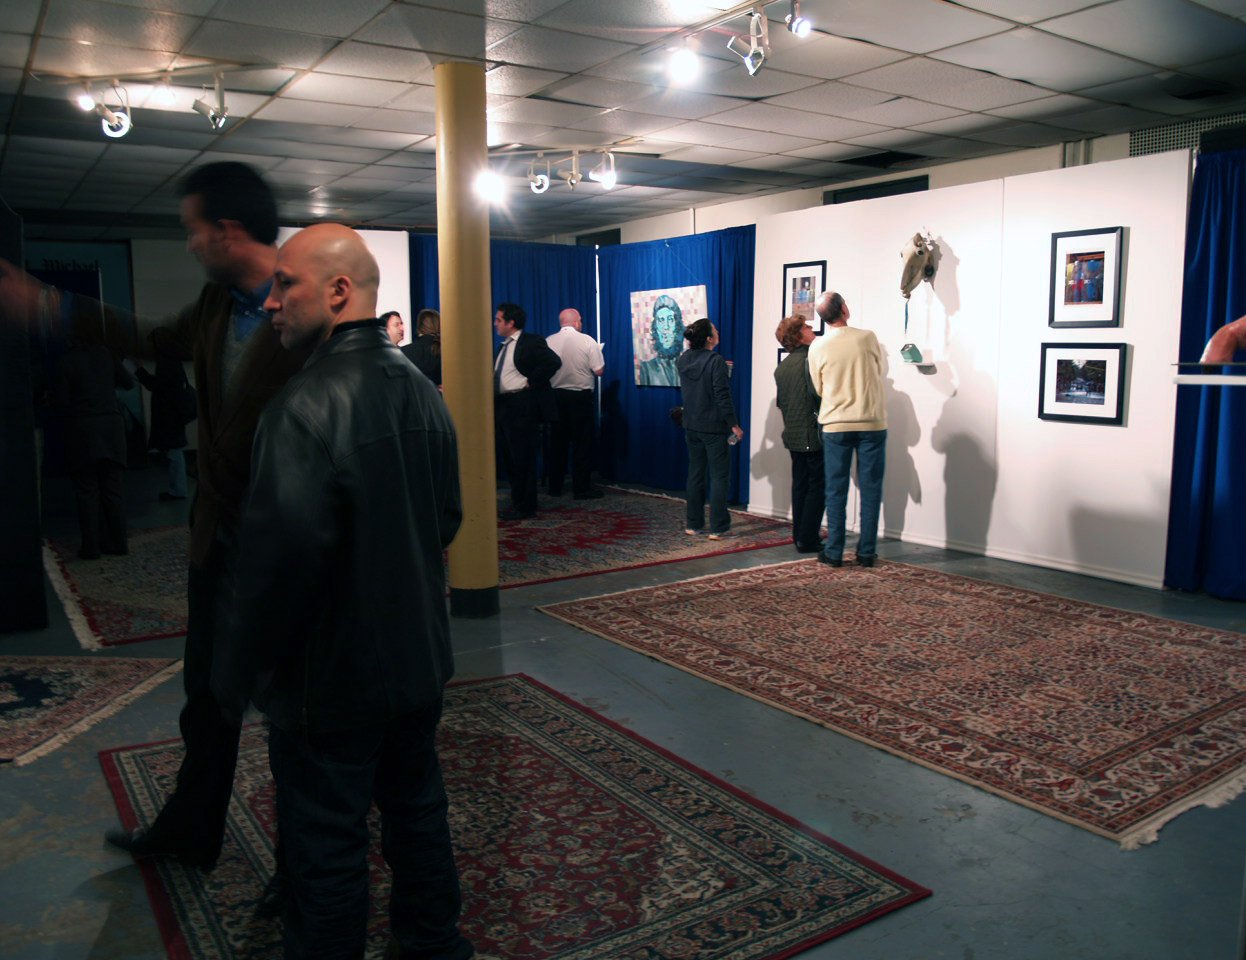 Artist Gallery 9 at the J City Theater 